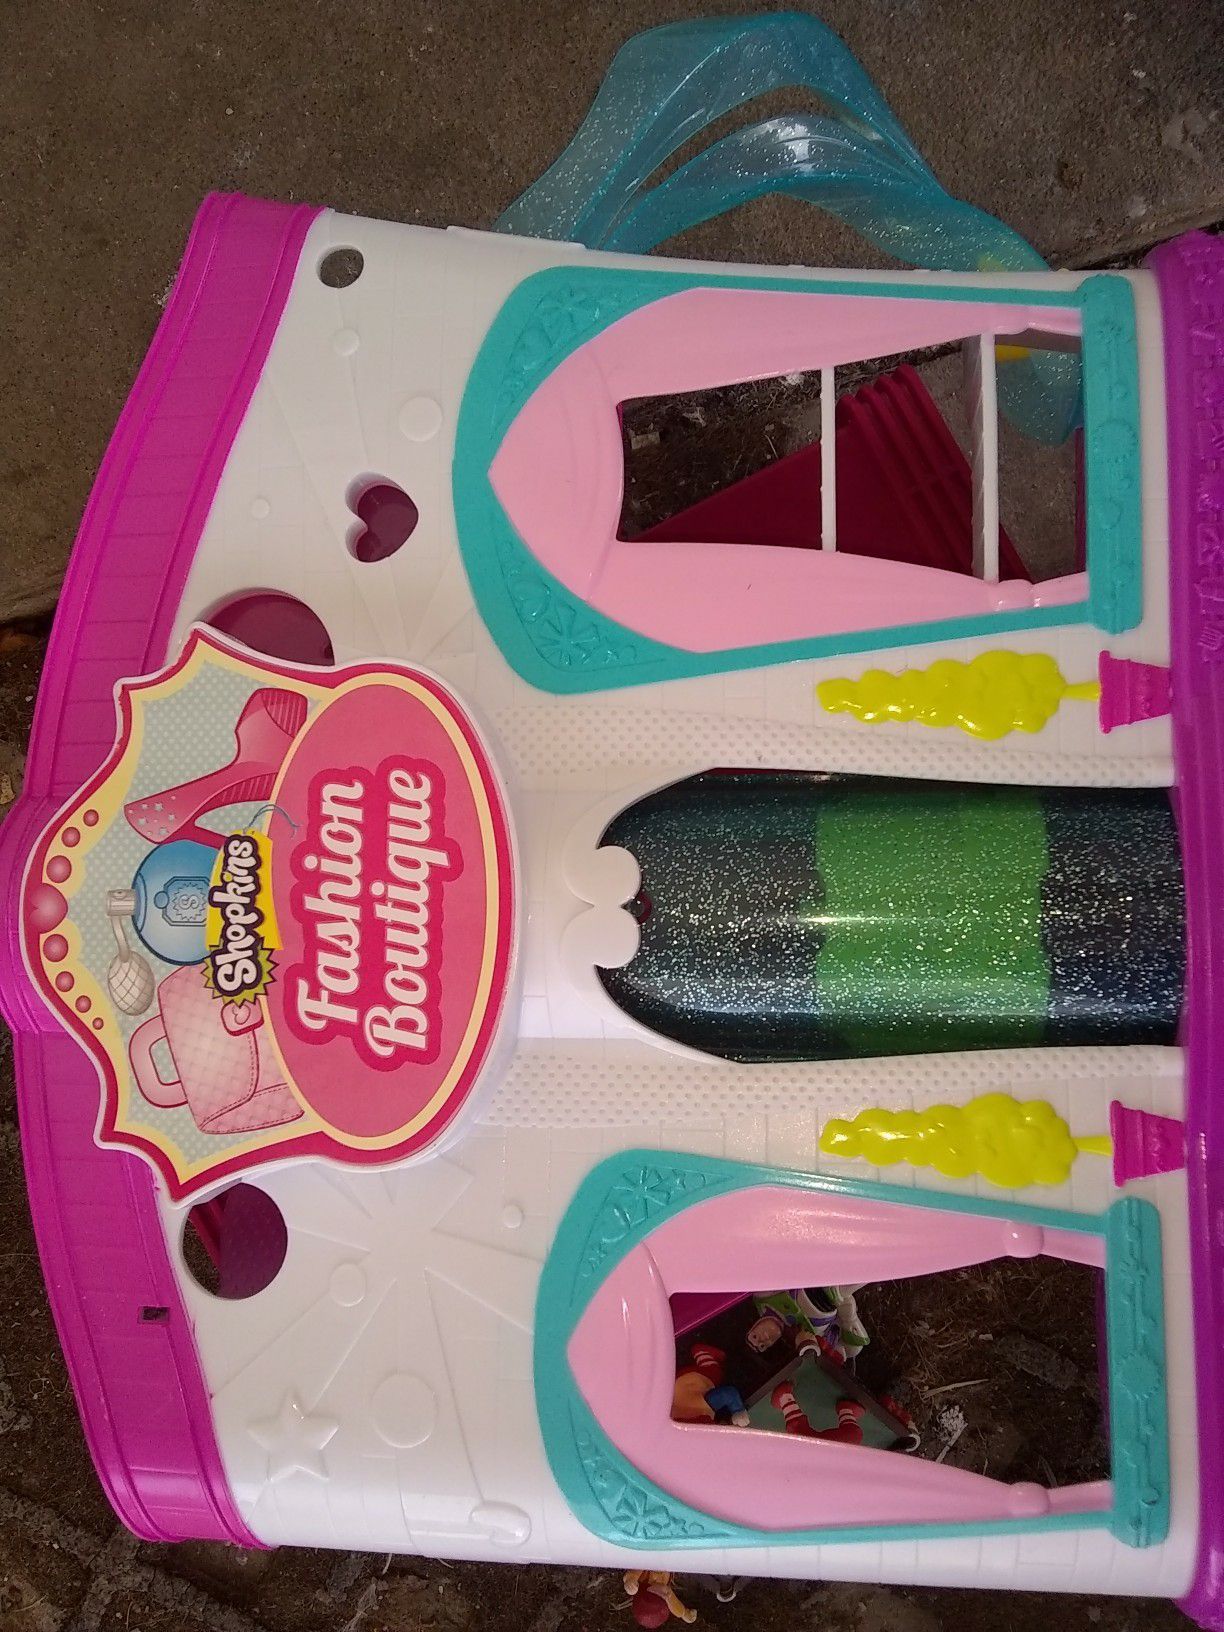 Shopkins figures and fashion Boutique playset